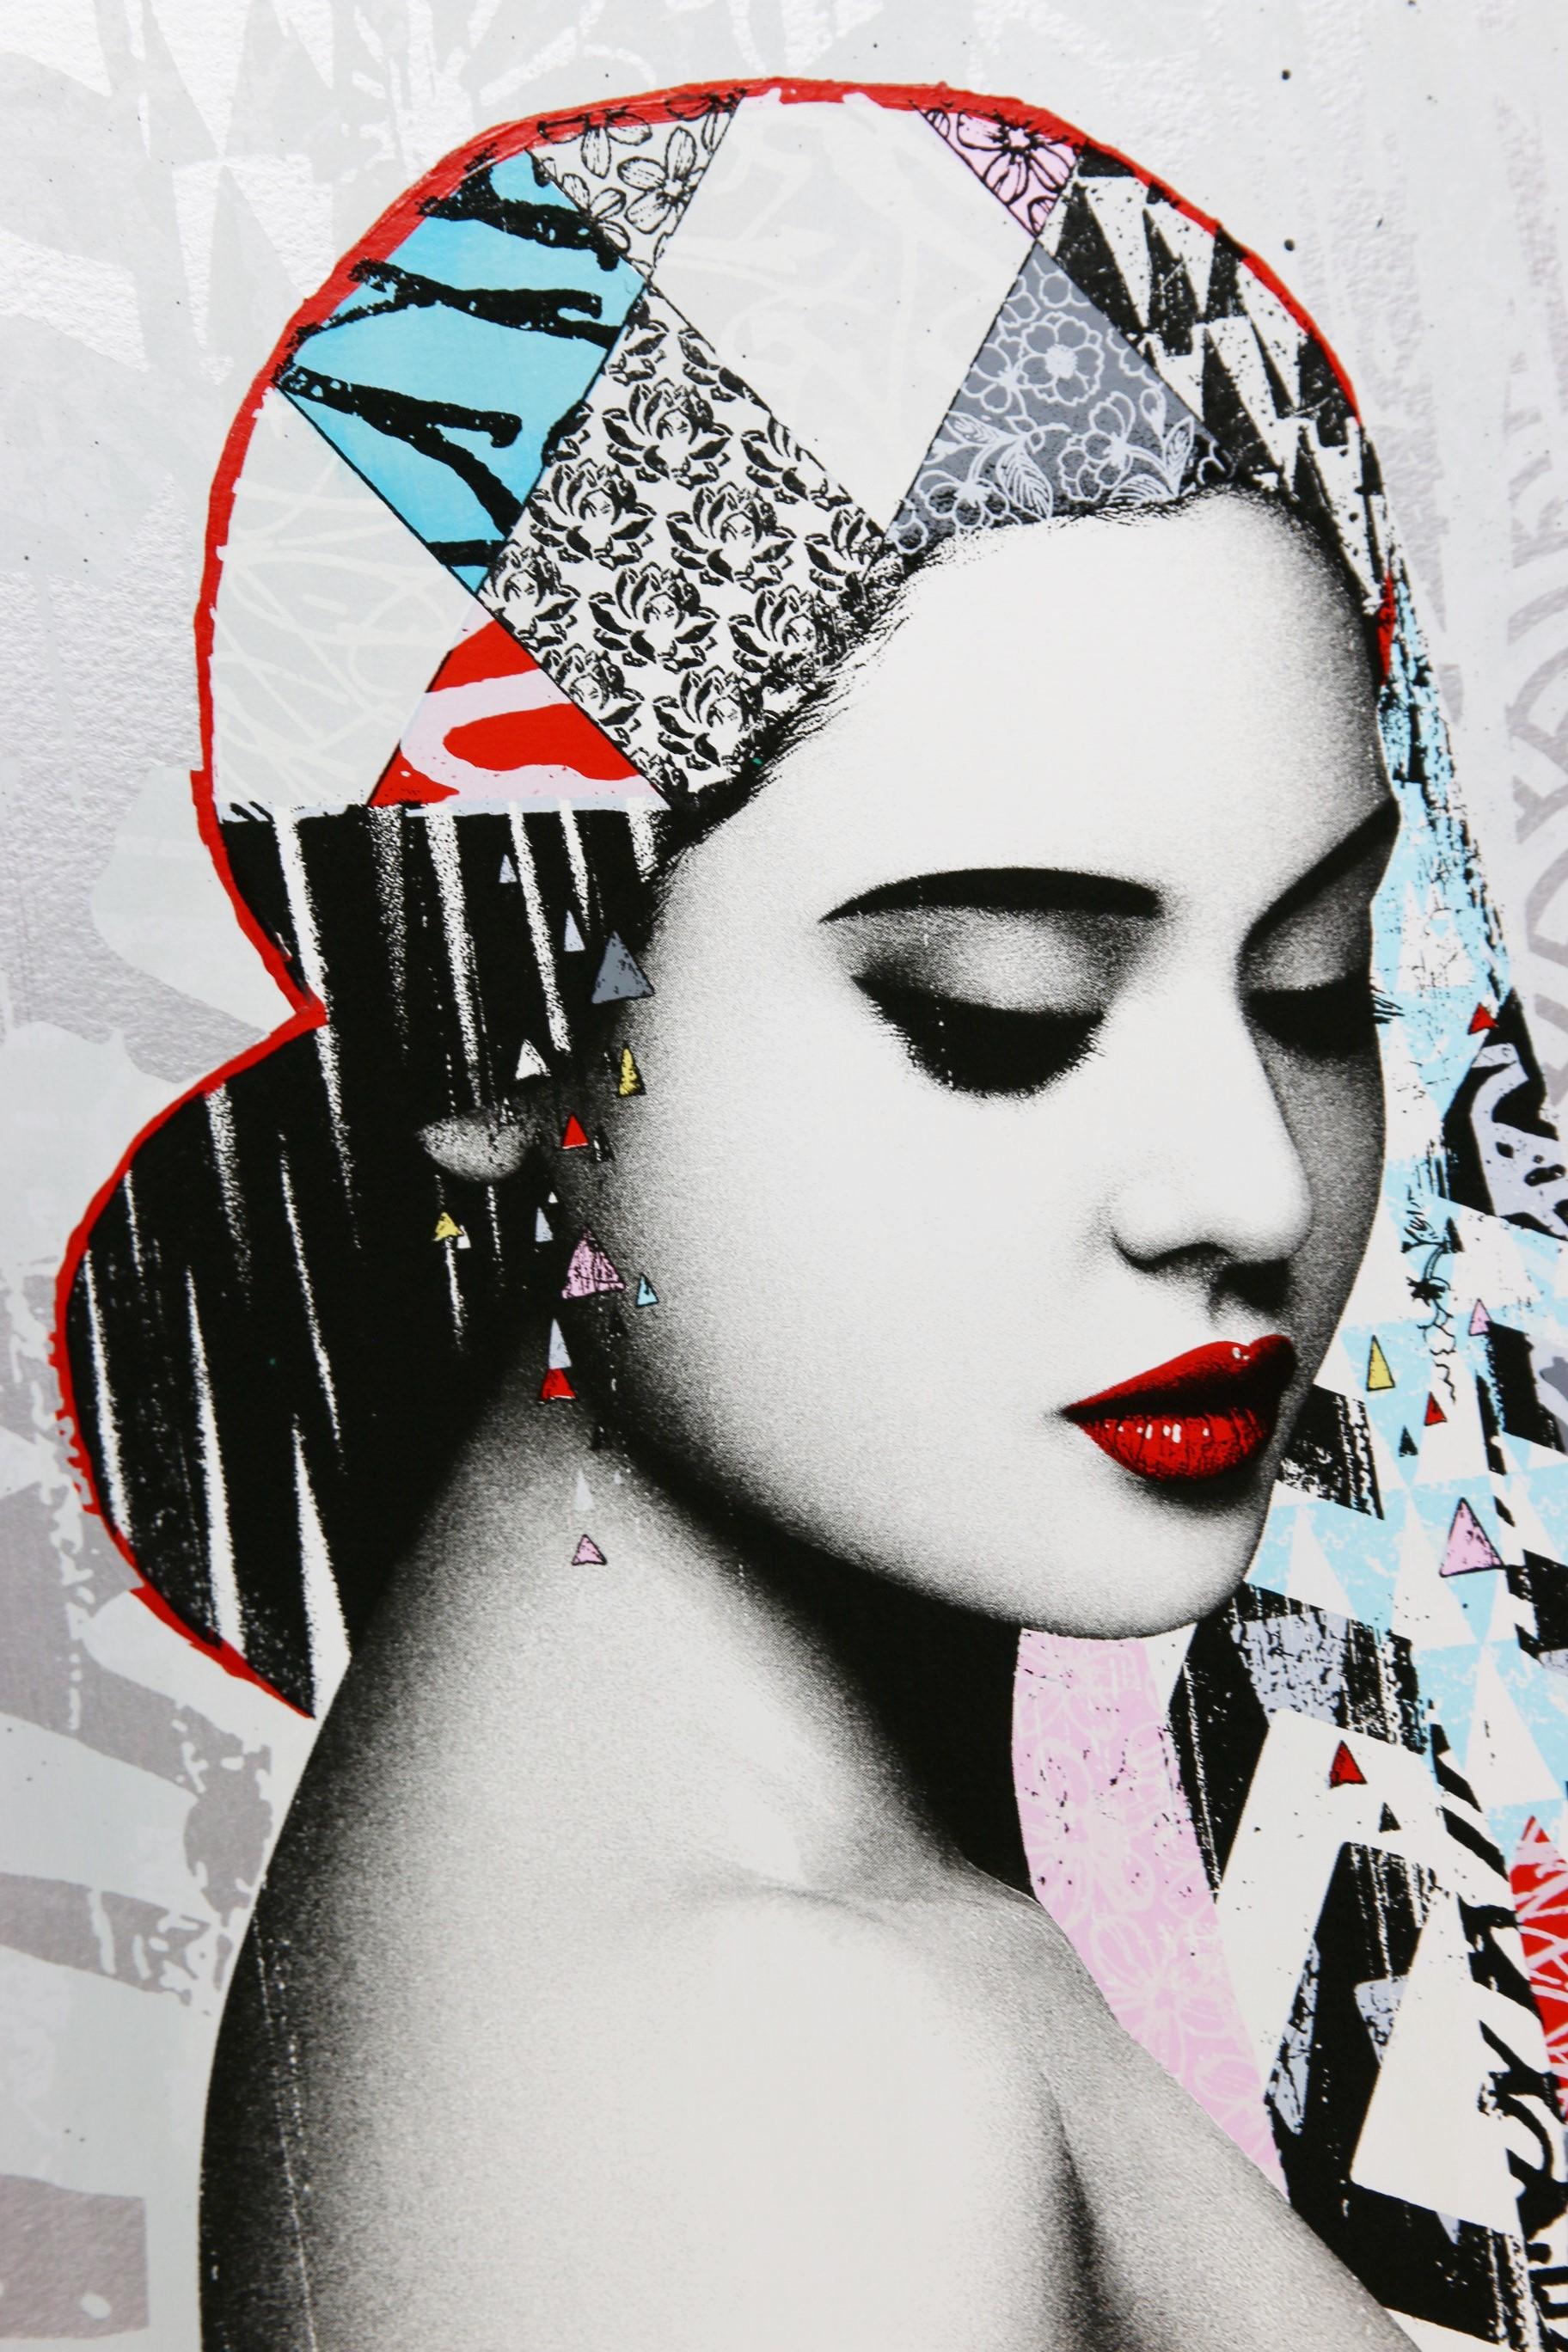 Elysian by Hush Signed and Numbered Hand Painted Multiple Screen Print For Sale 1